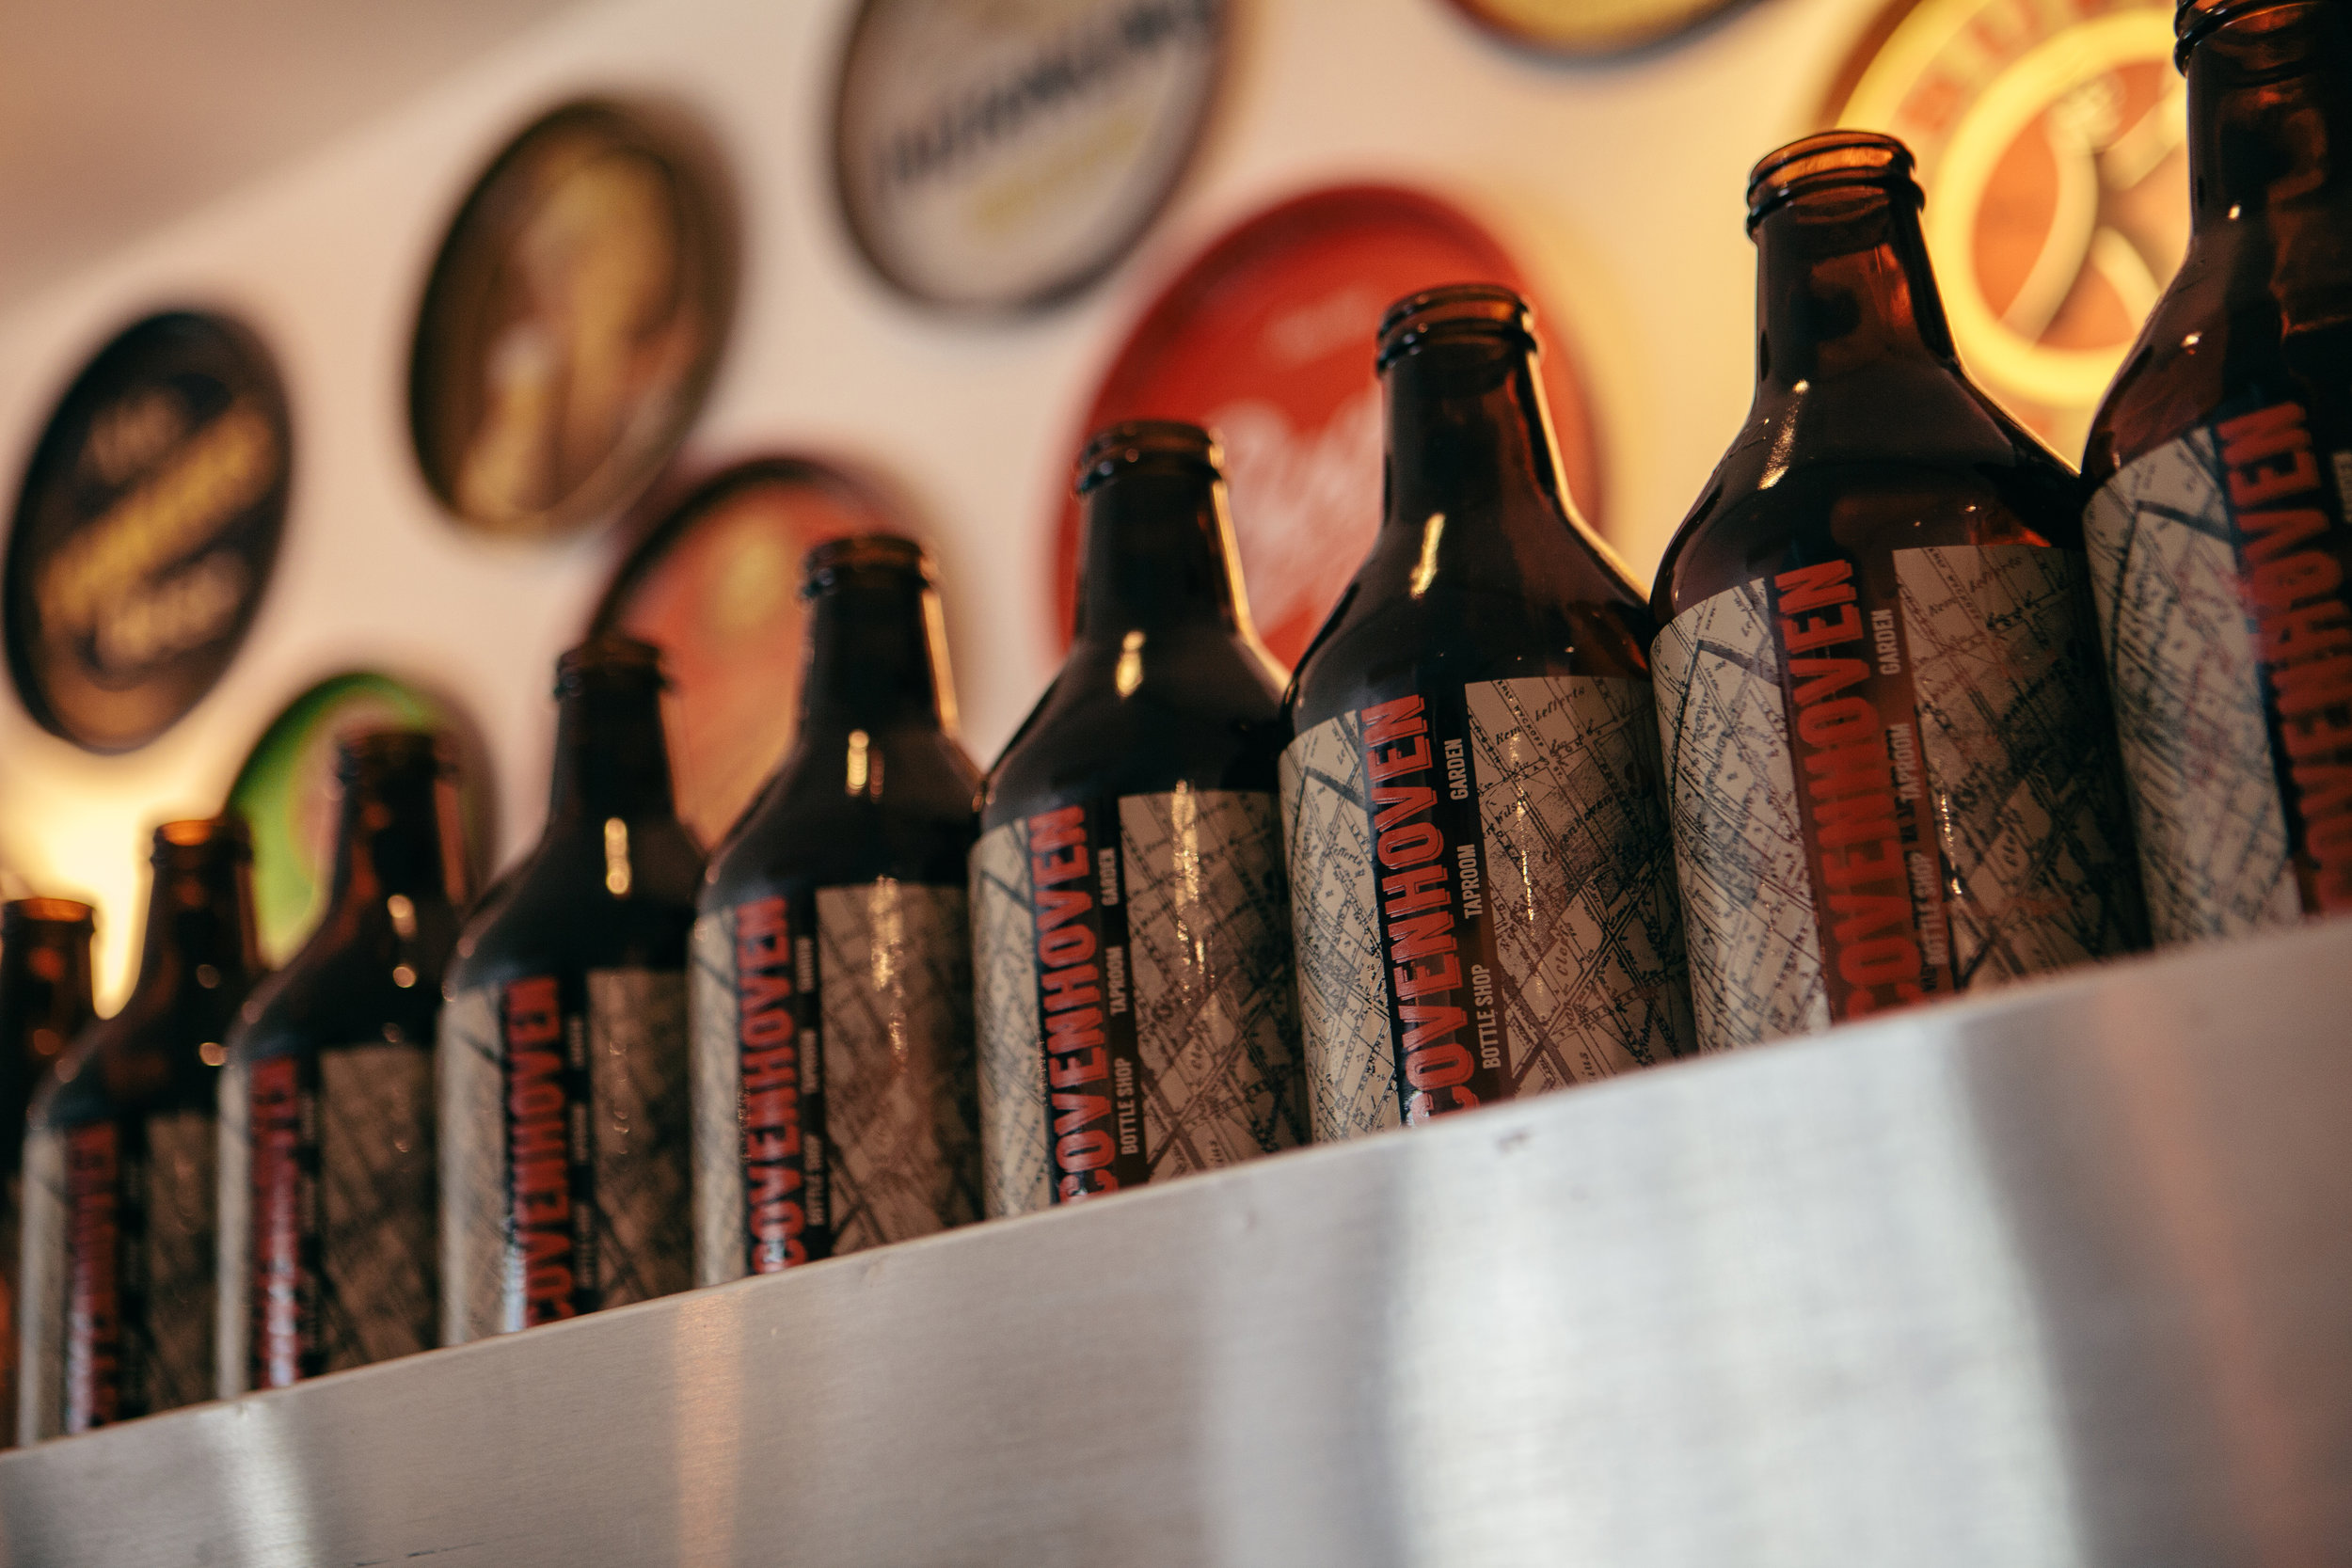 growlers lined up